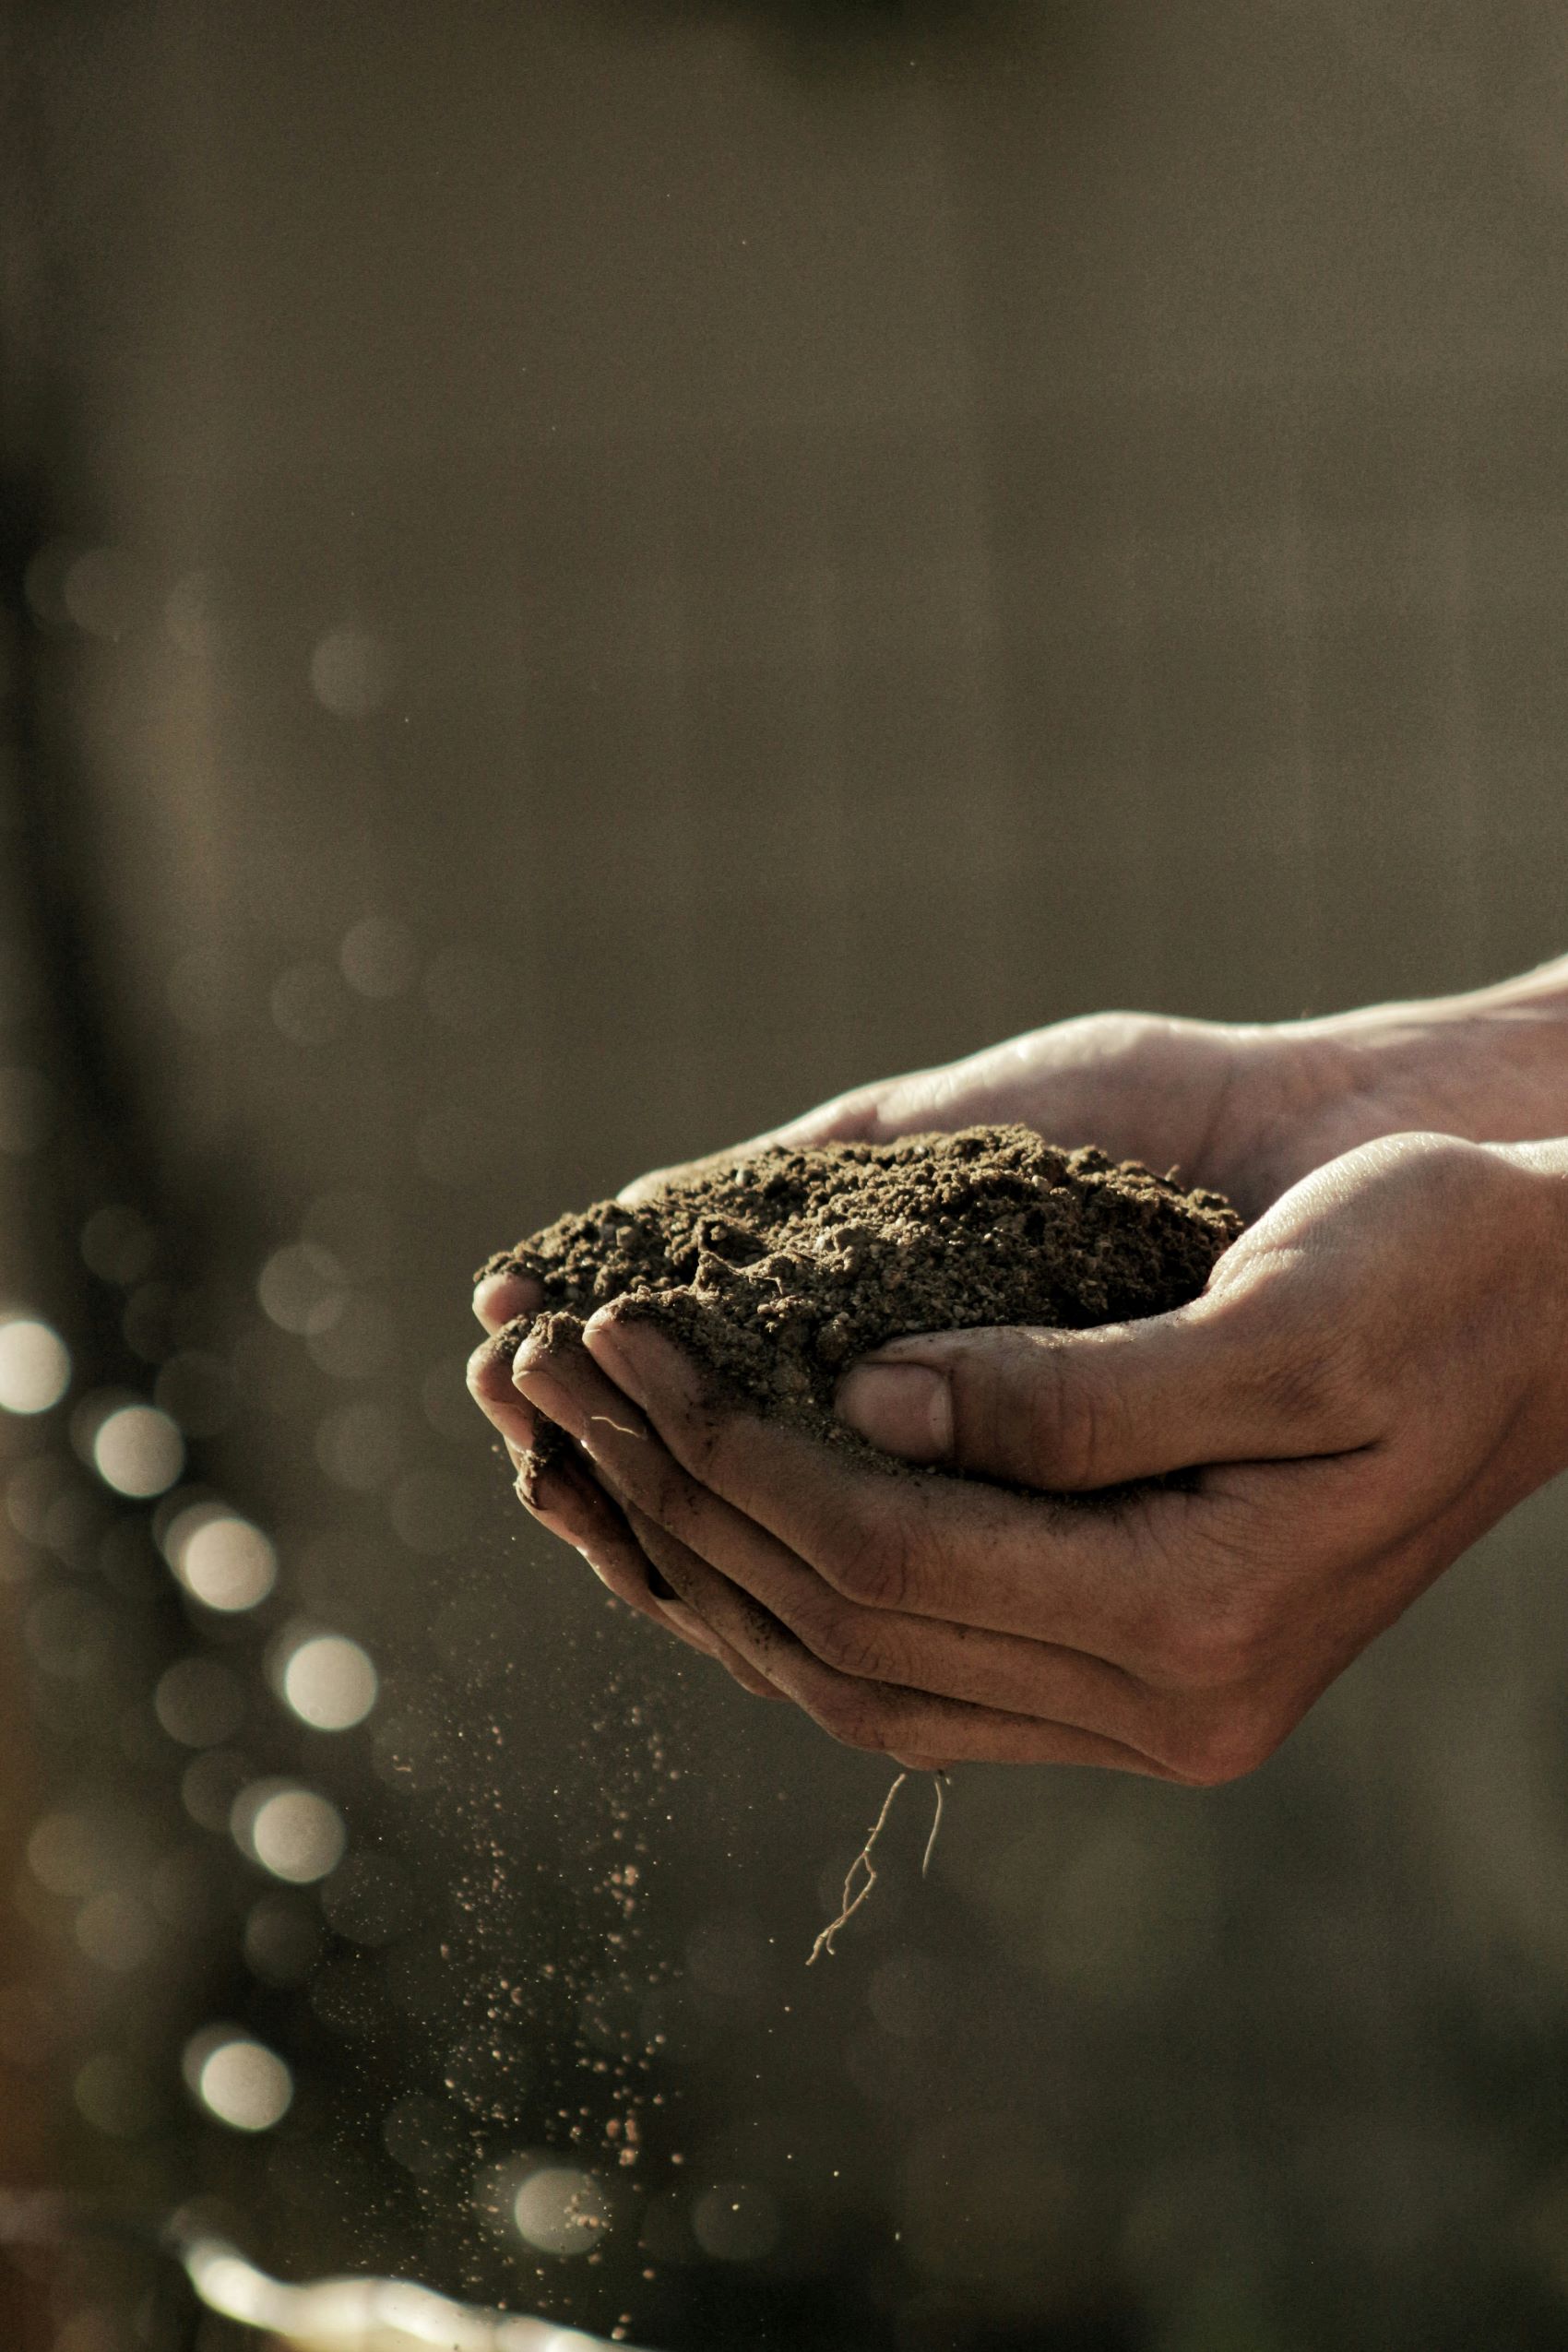 An image of soil in someone's hands